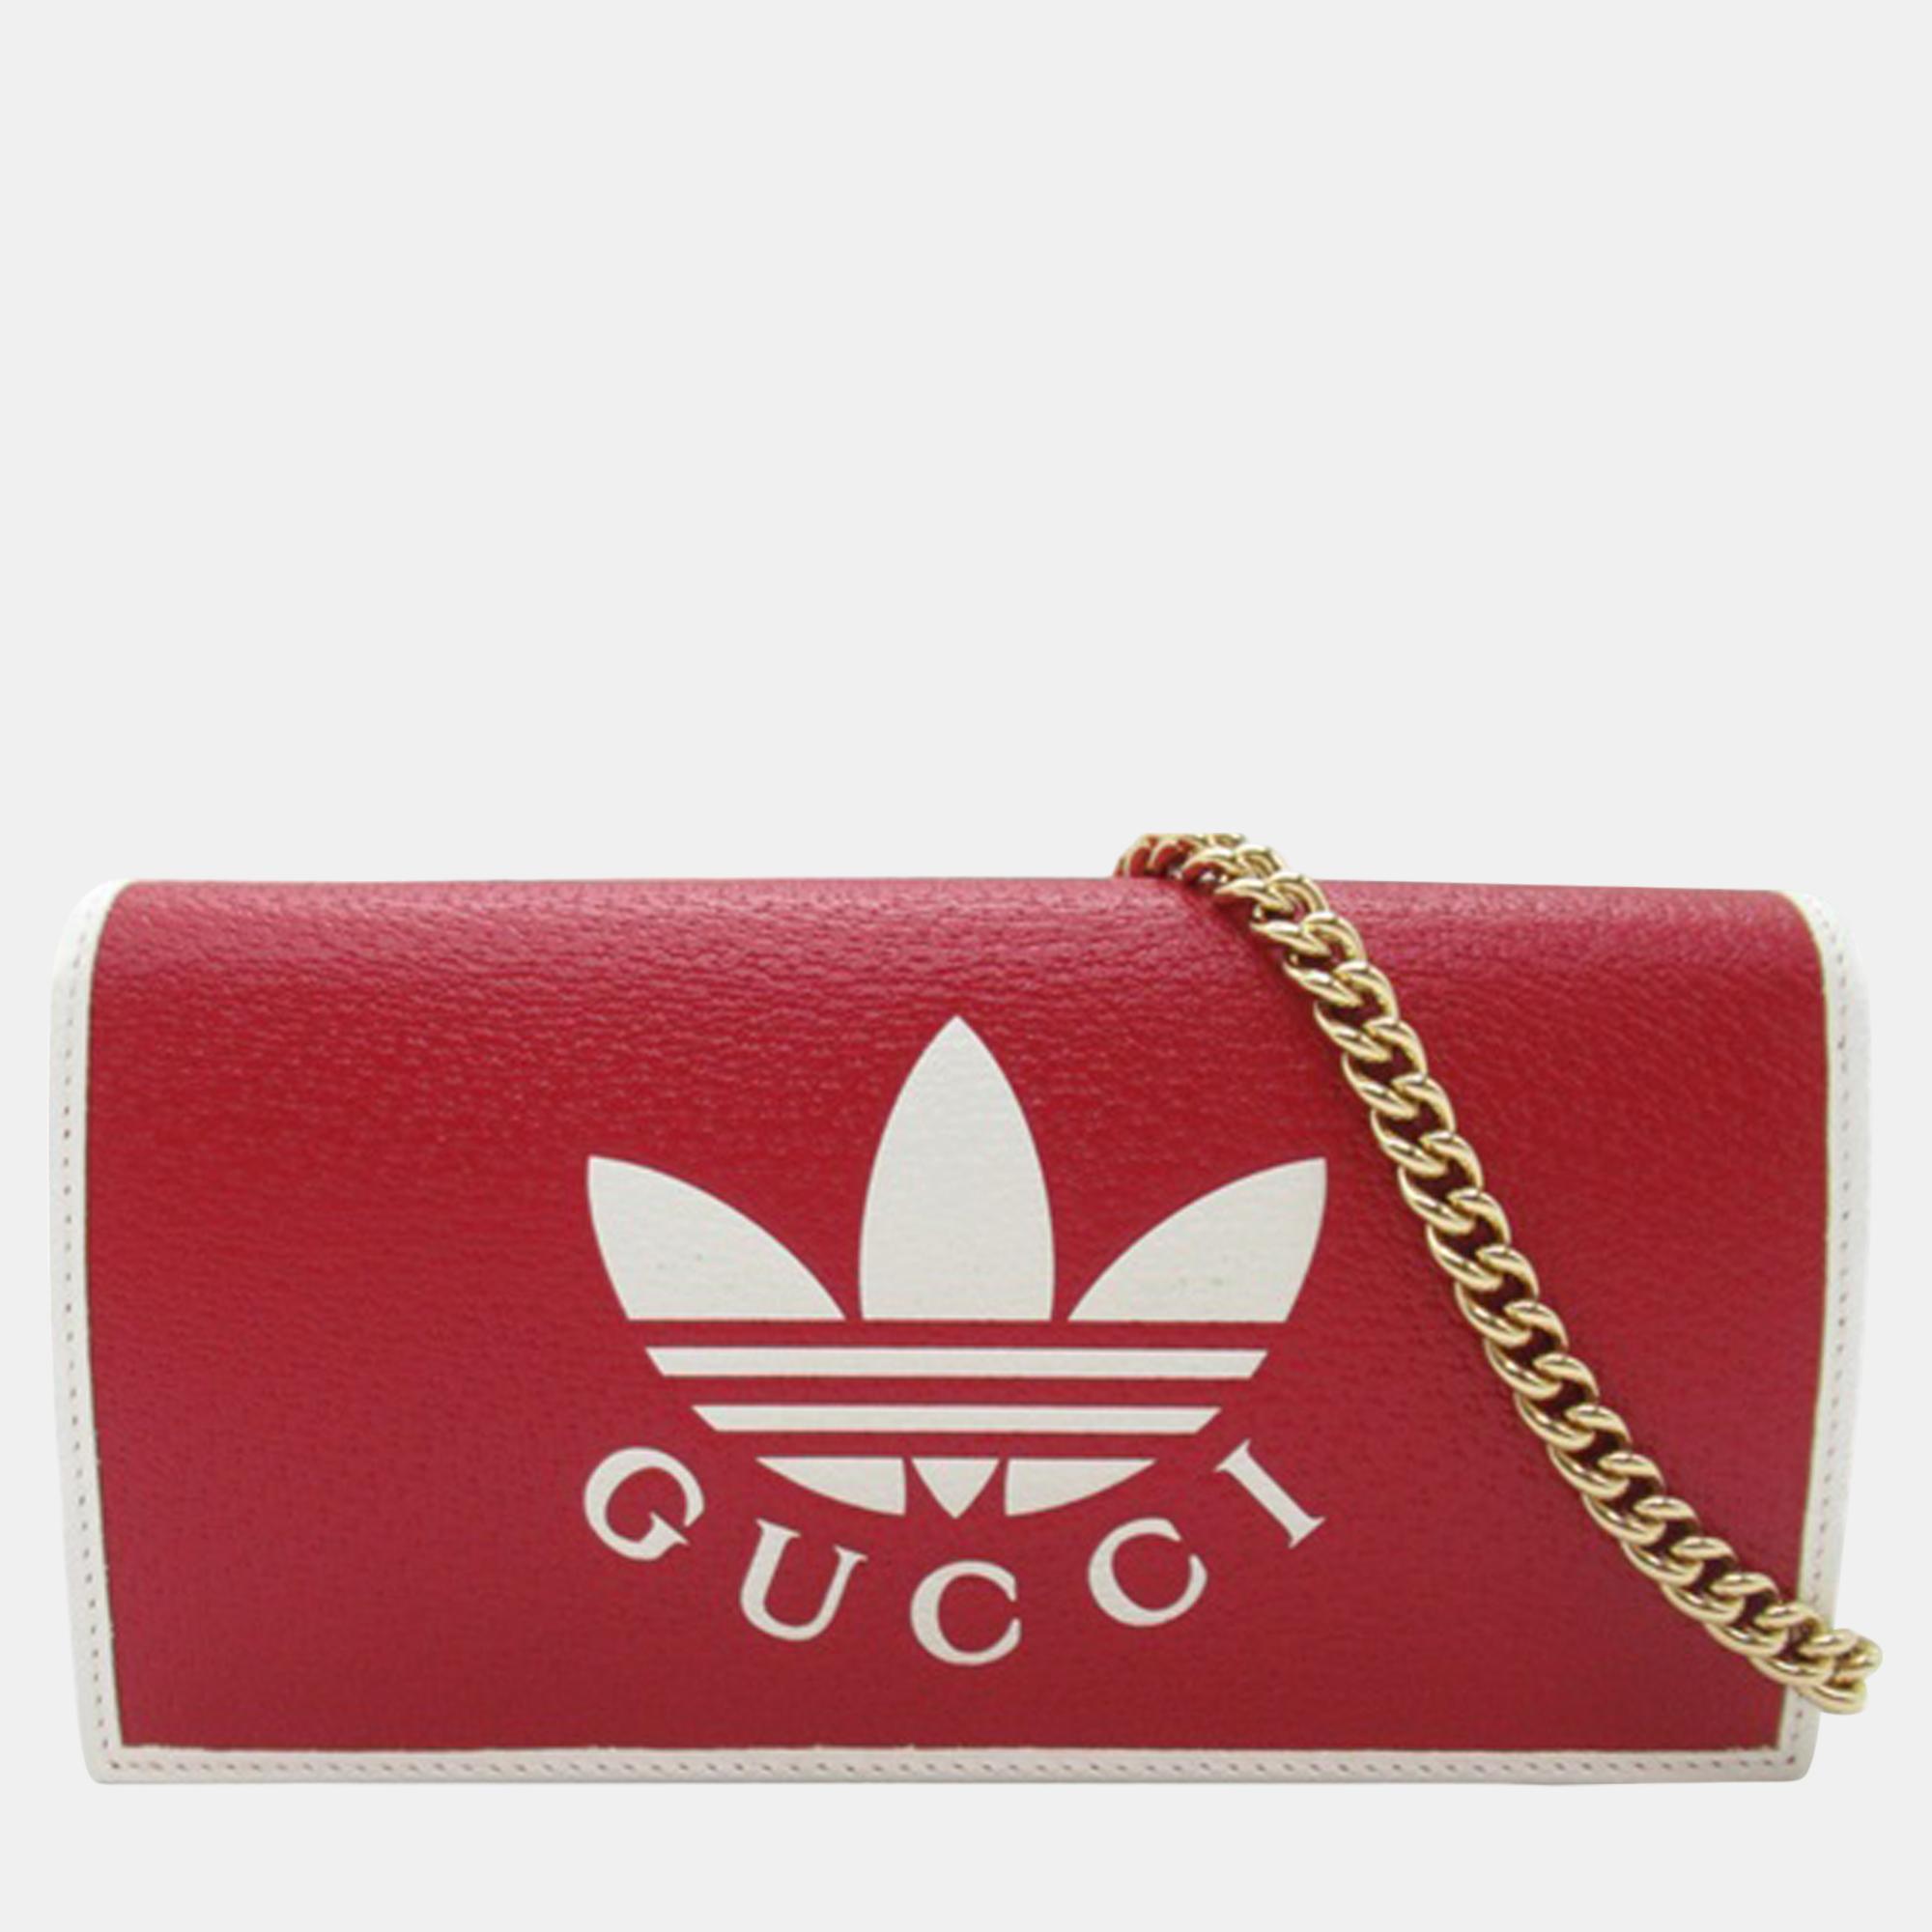 Gucci red/white adidas leather wallet on chain